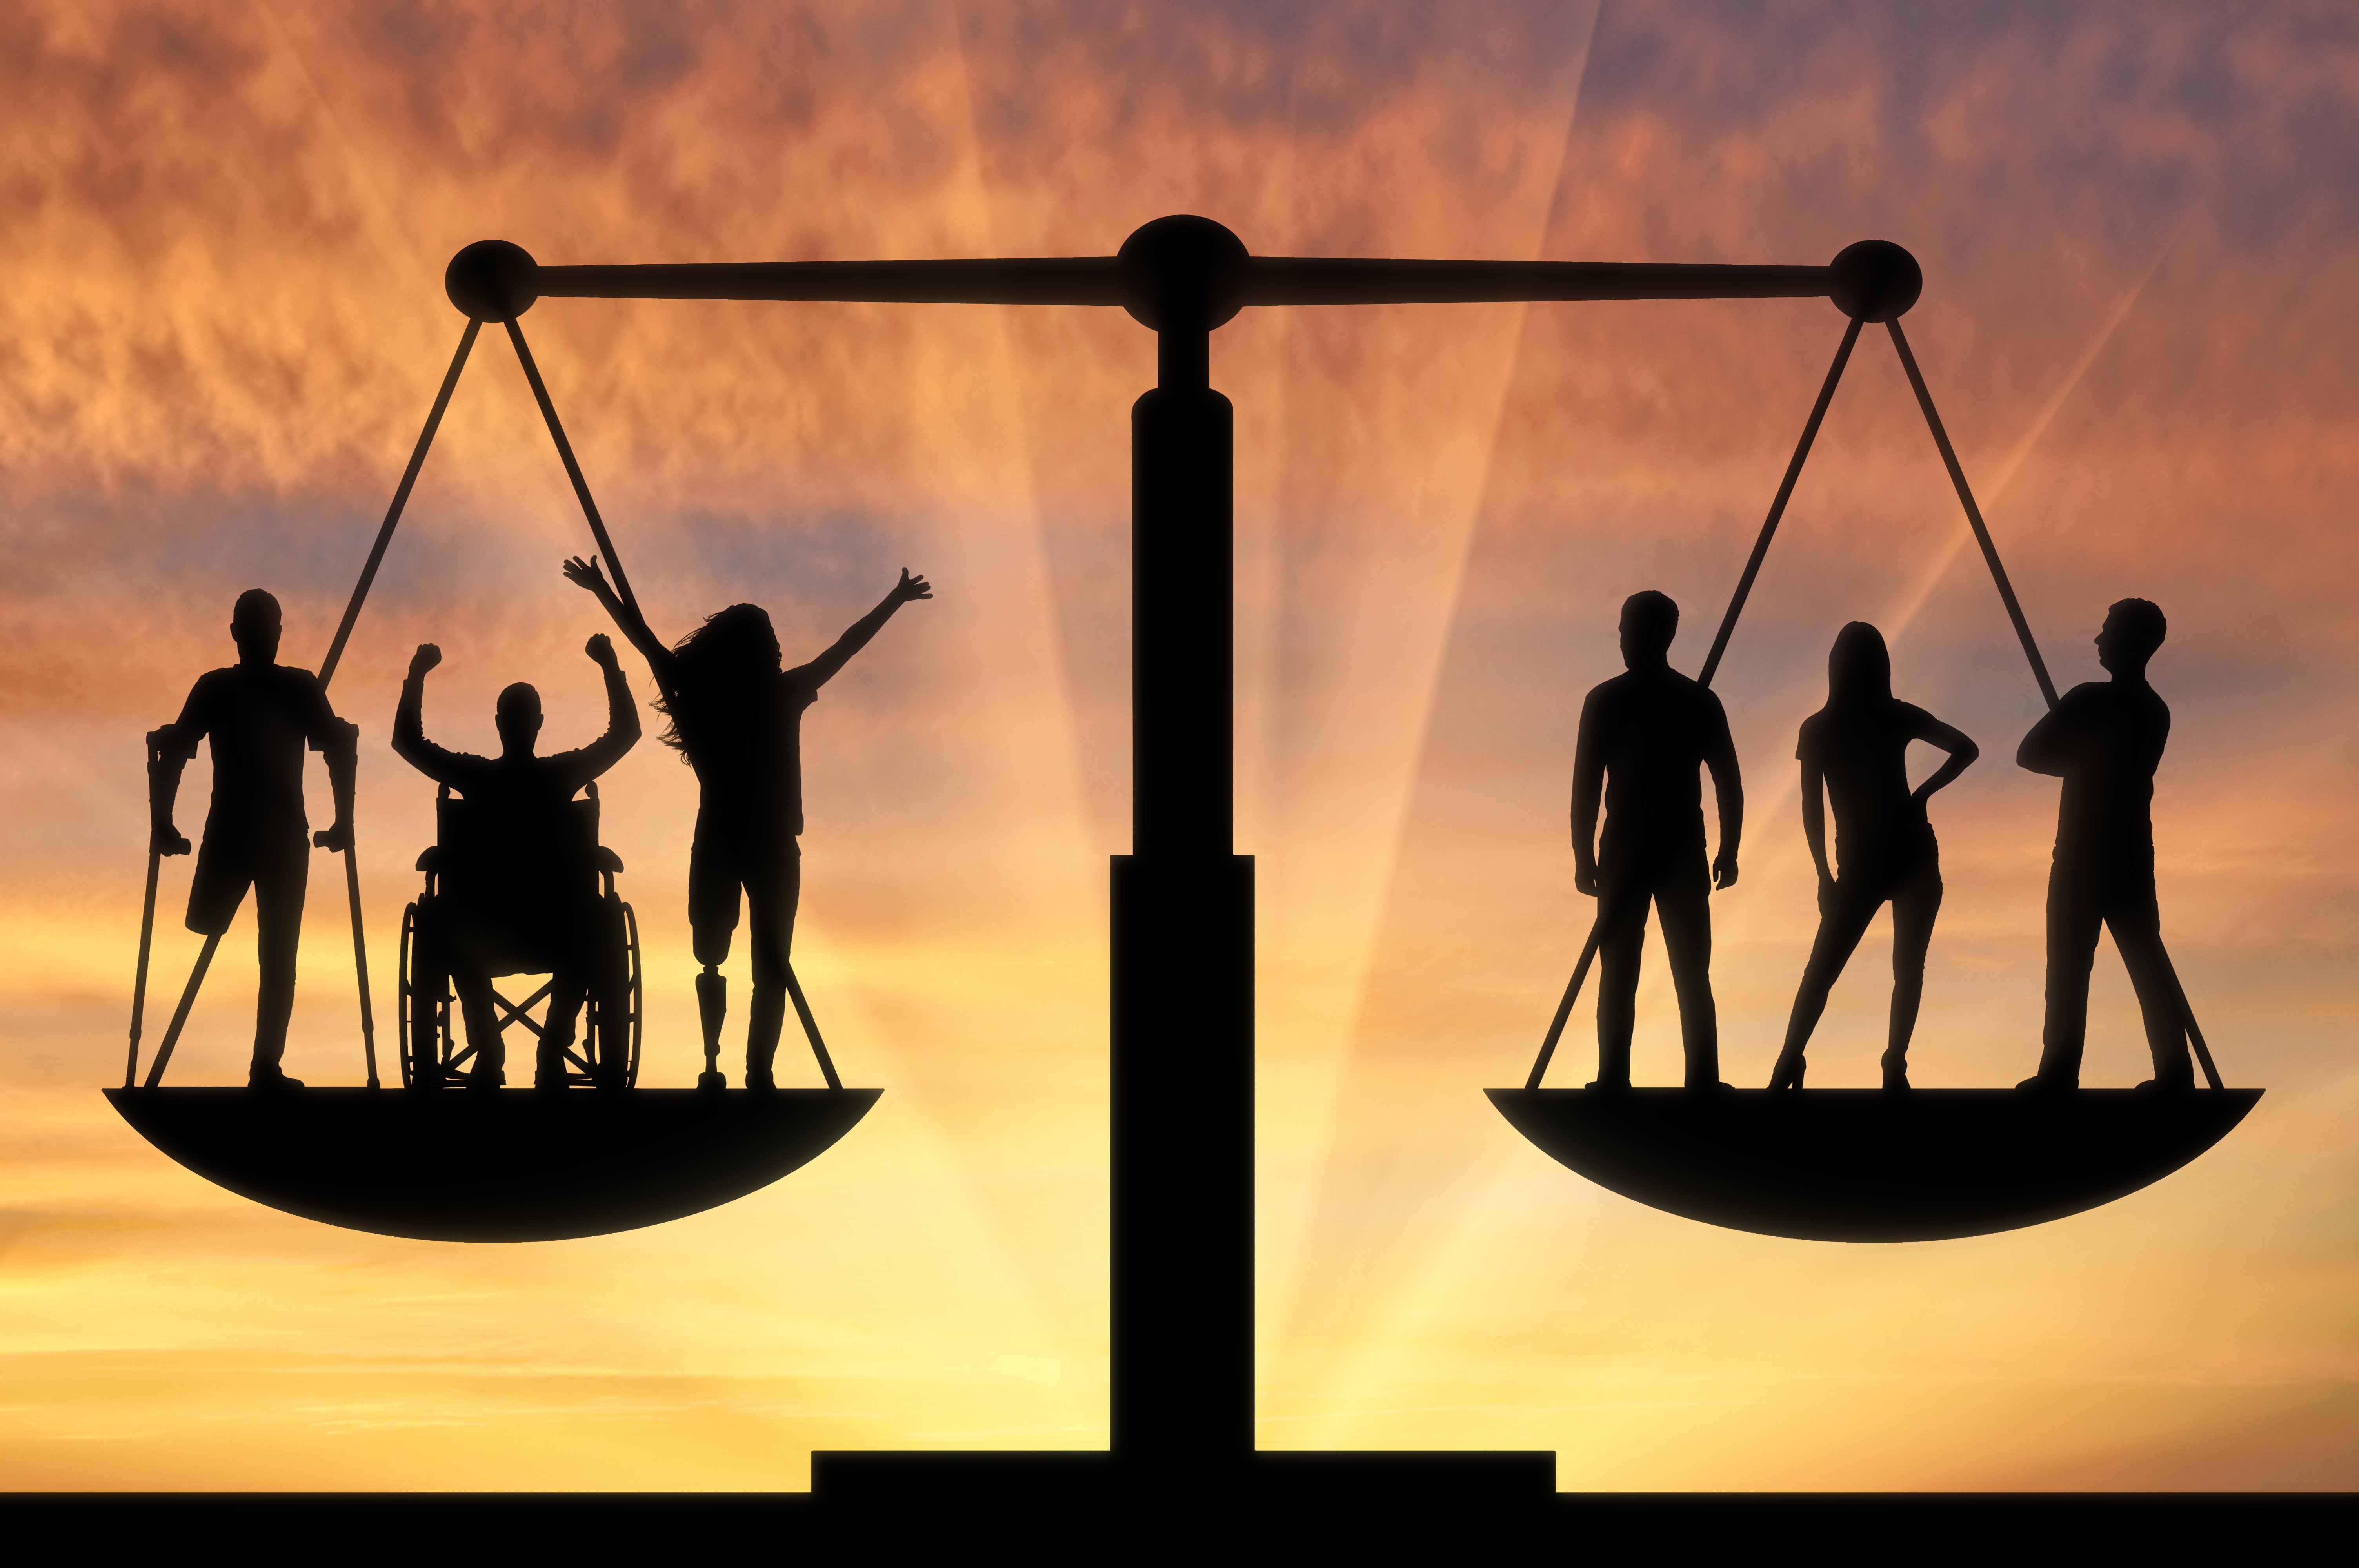 Legal equality of persons with disabilities in society